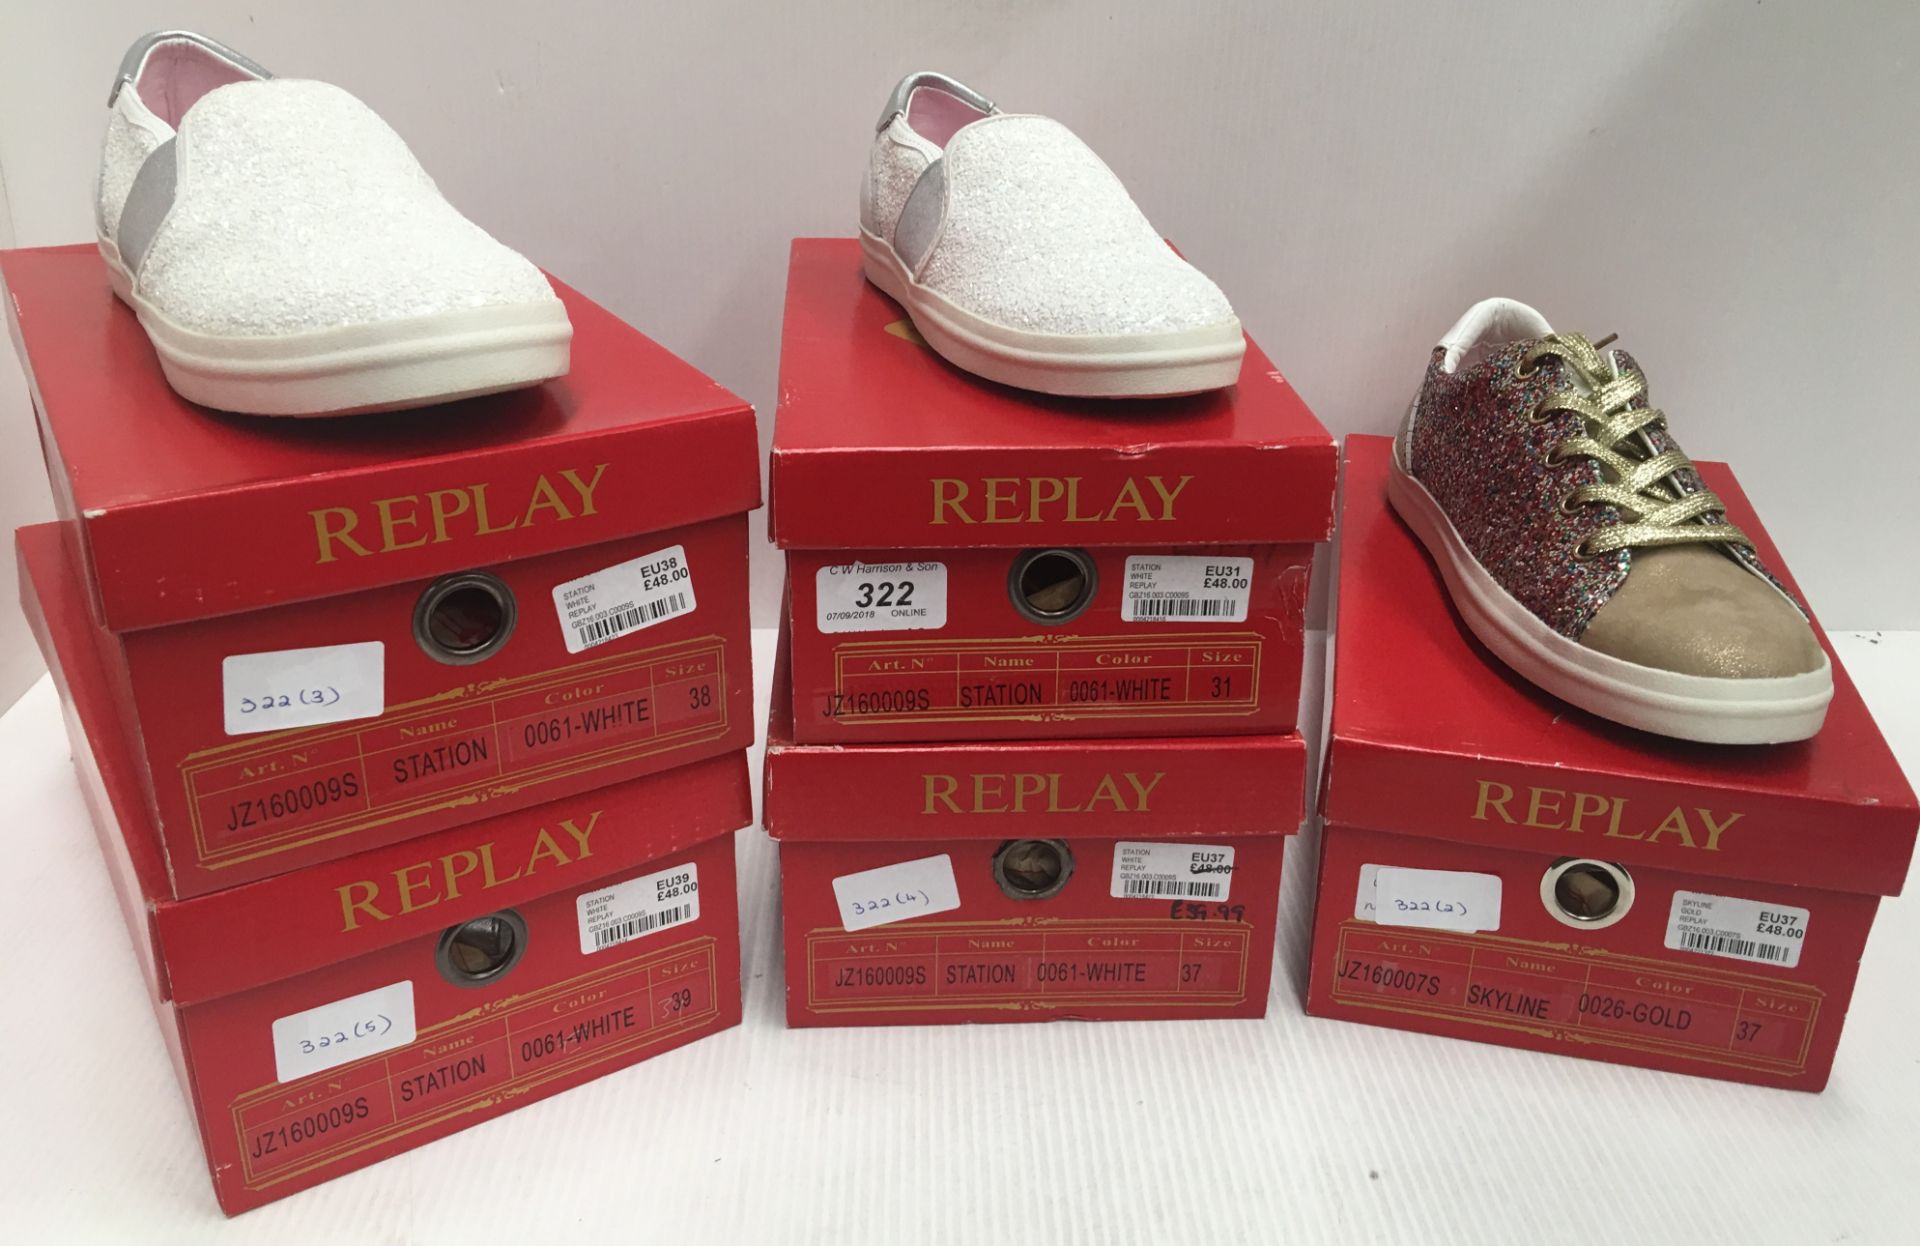 5 x pairs of children's shoes - Replay &